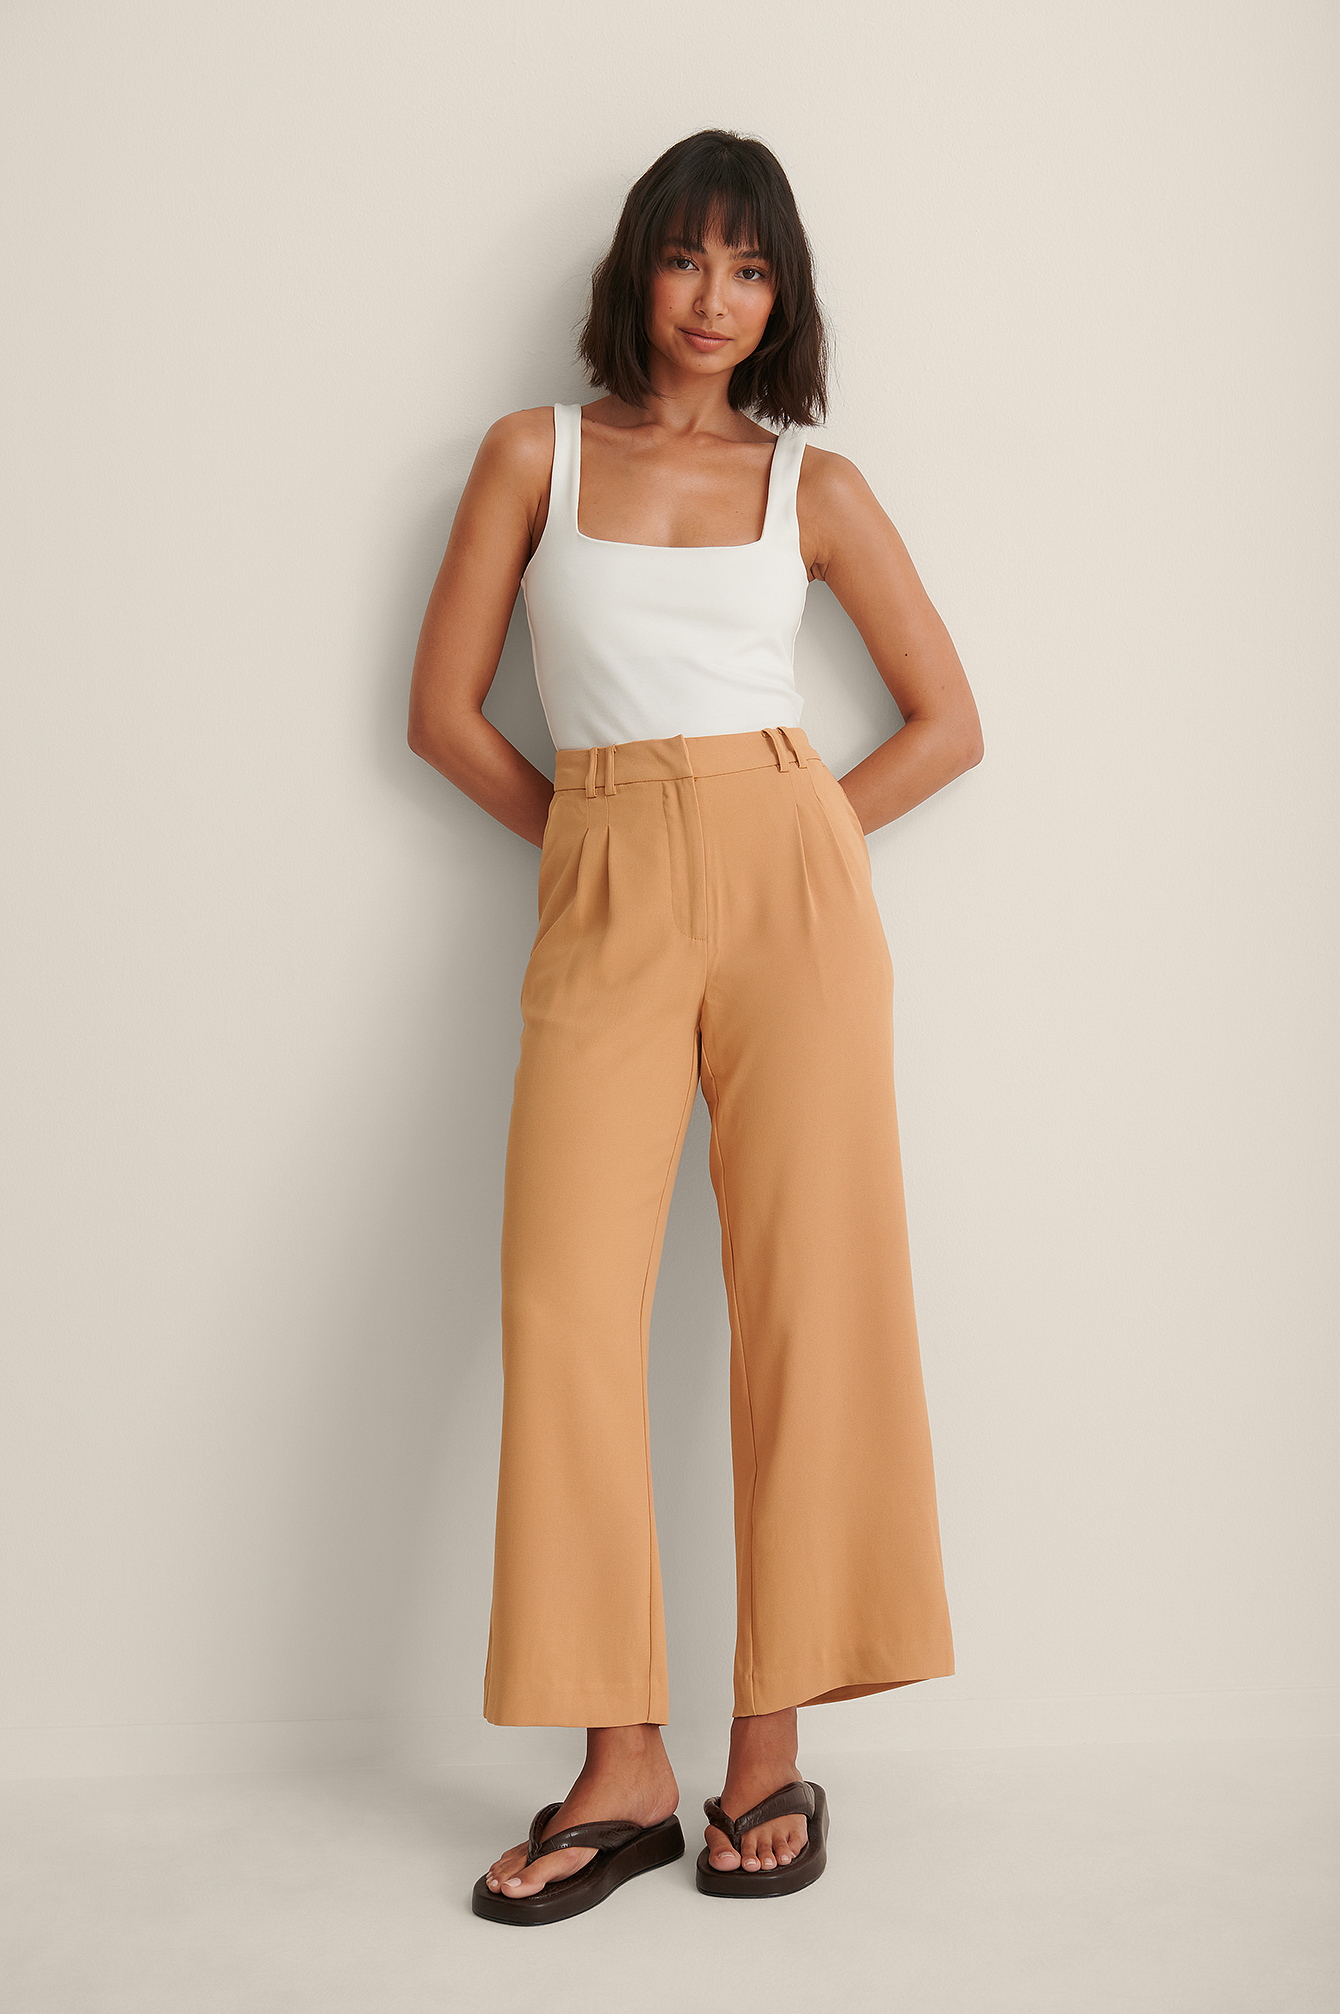 Elastic Waist Loose Fit Pants Outfit.